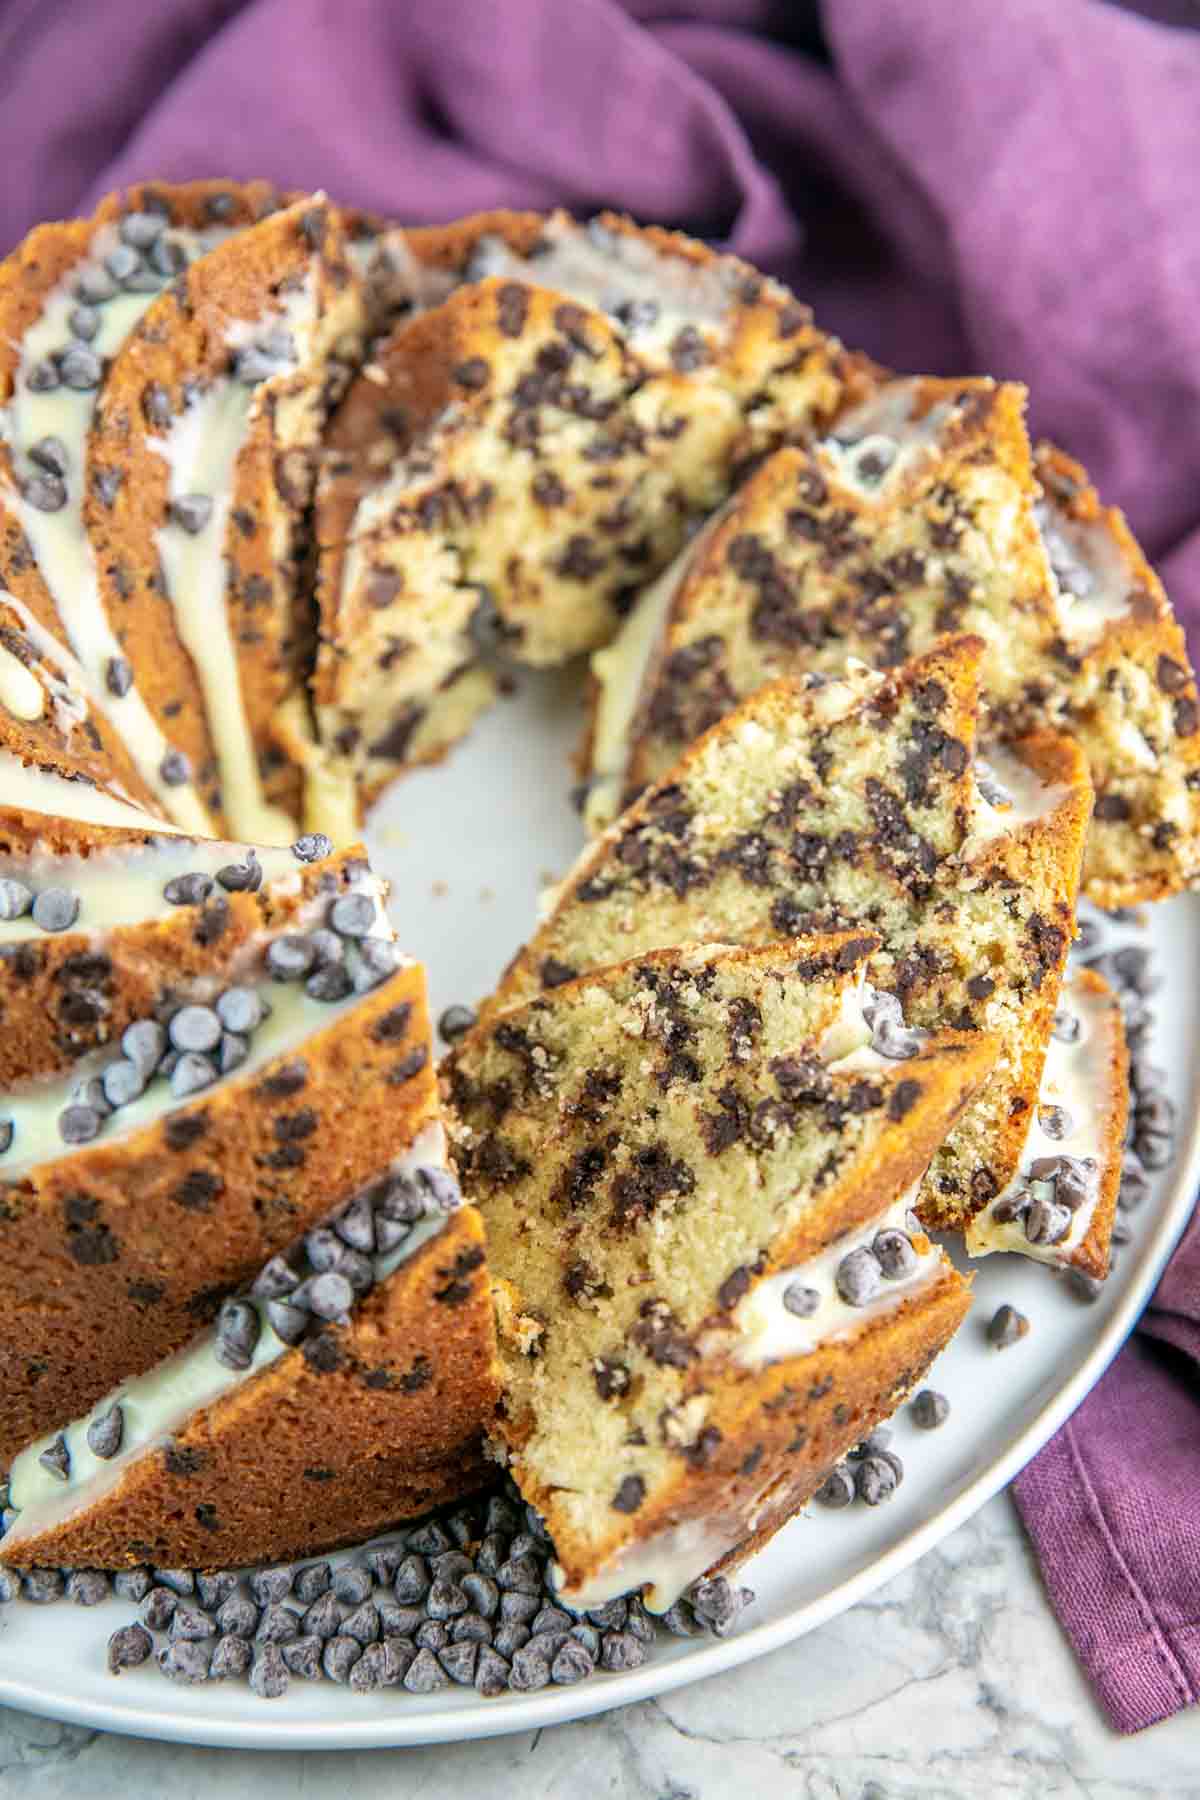 Chocolate chip bundt cake cut into slices on a white platter.